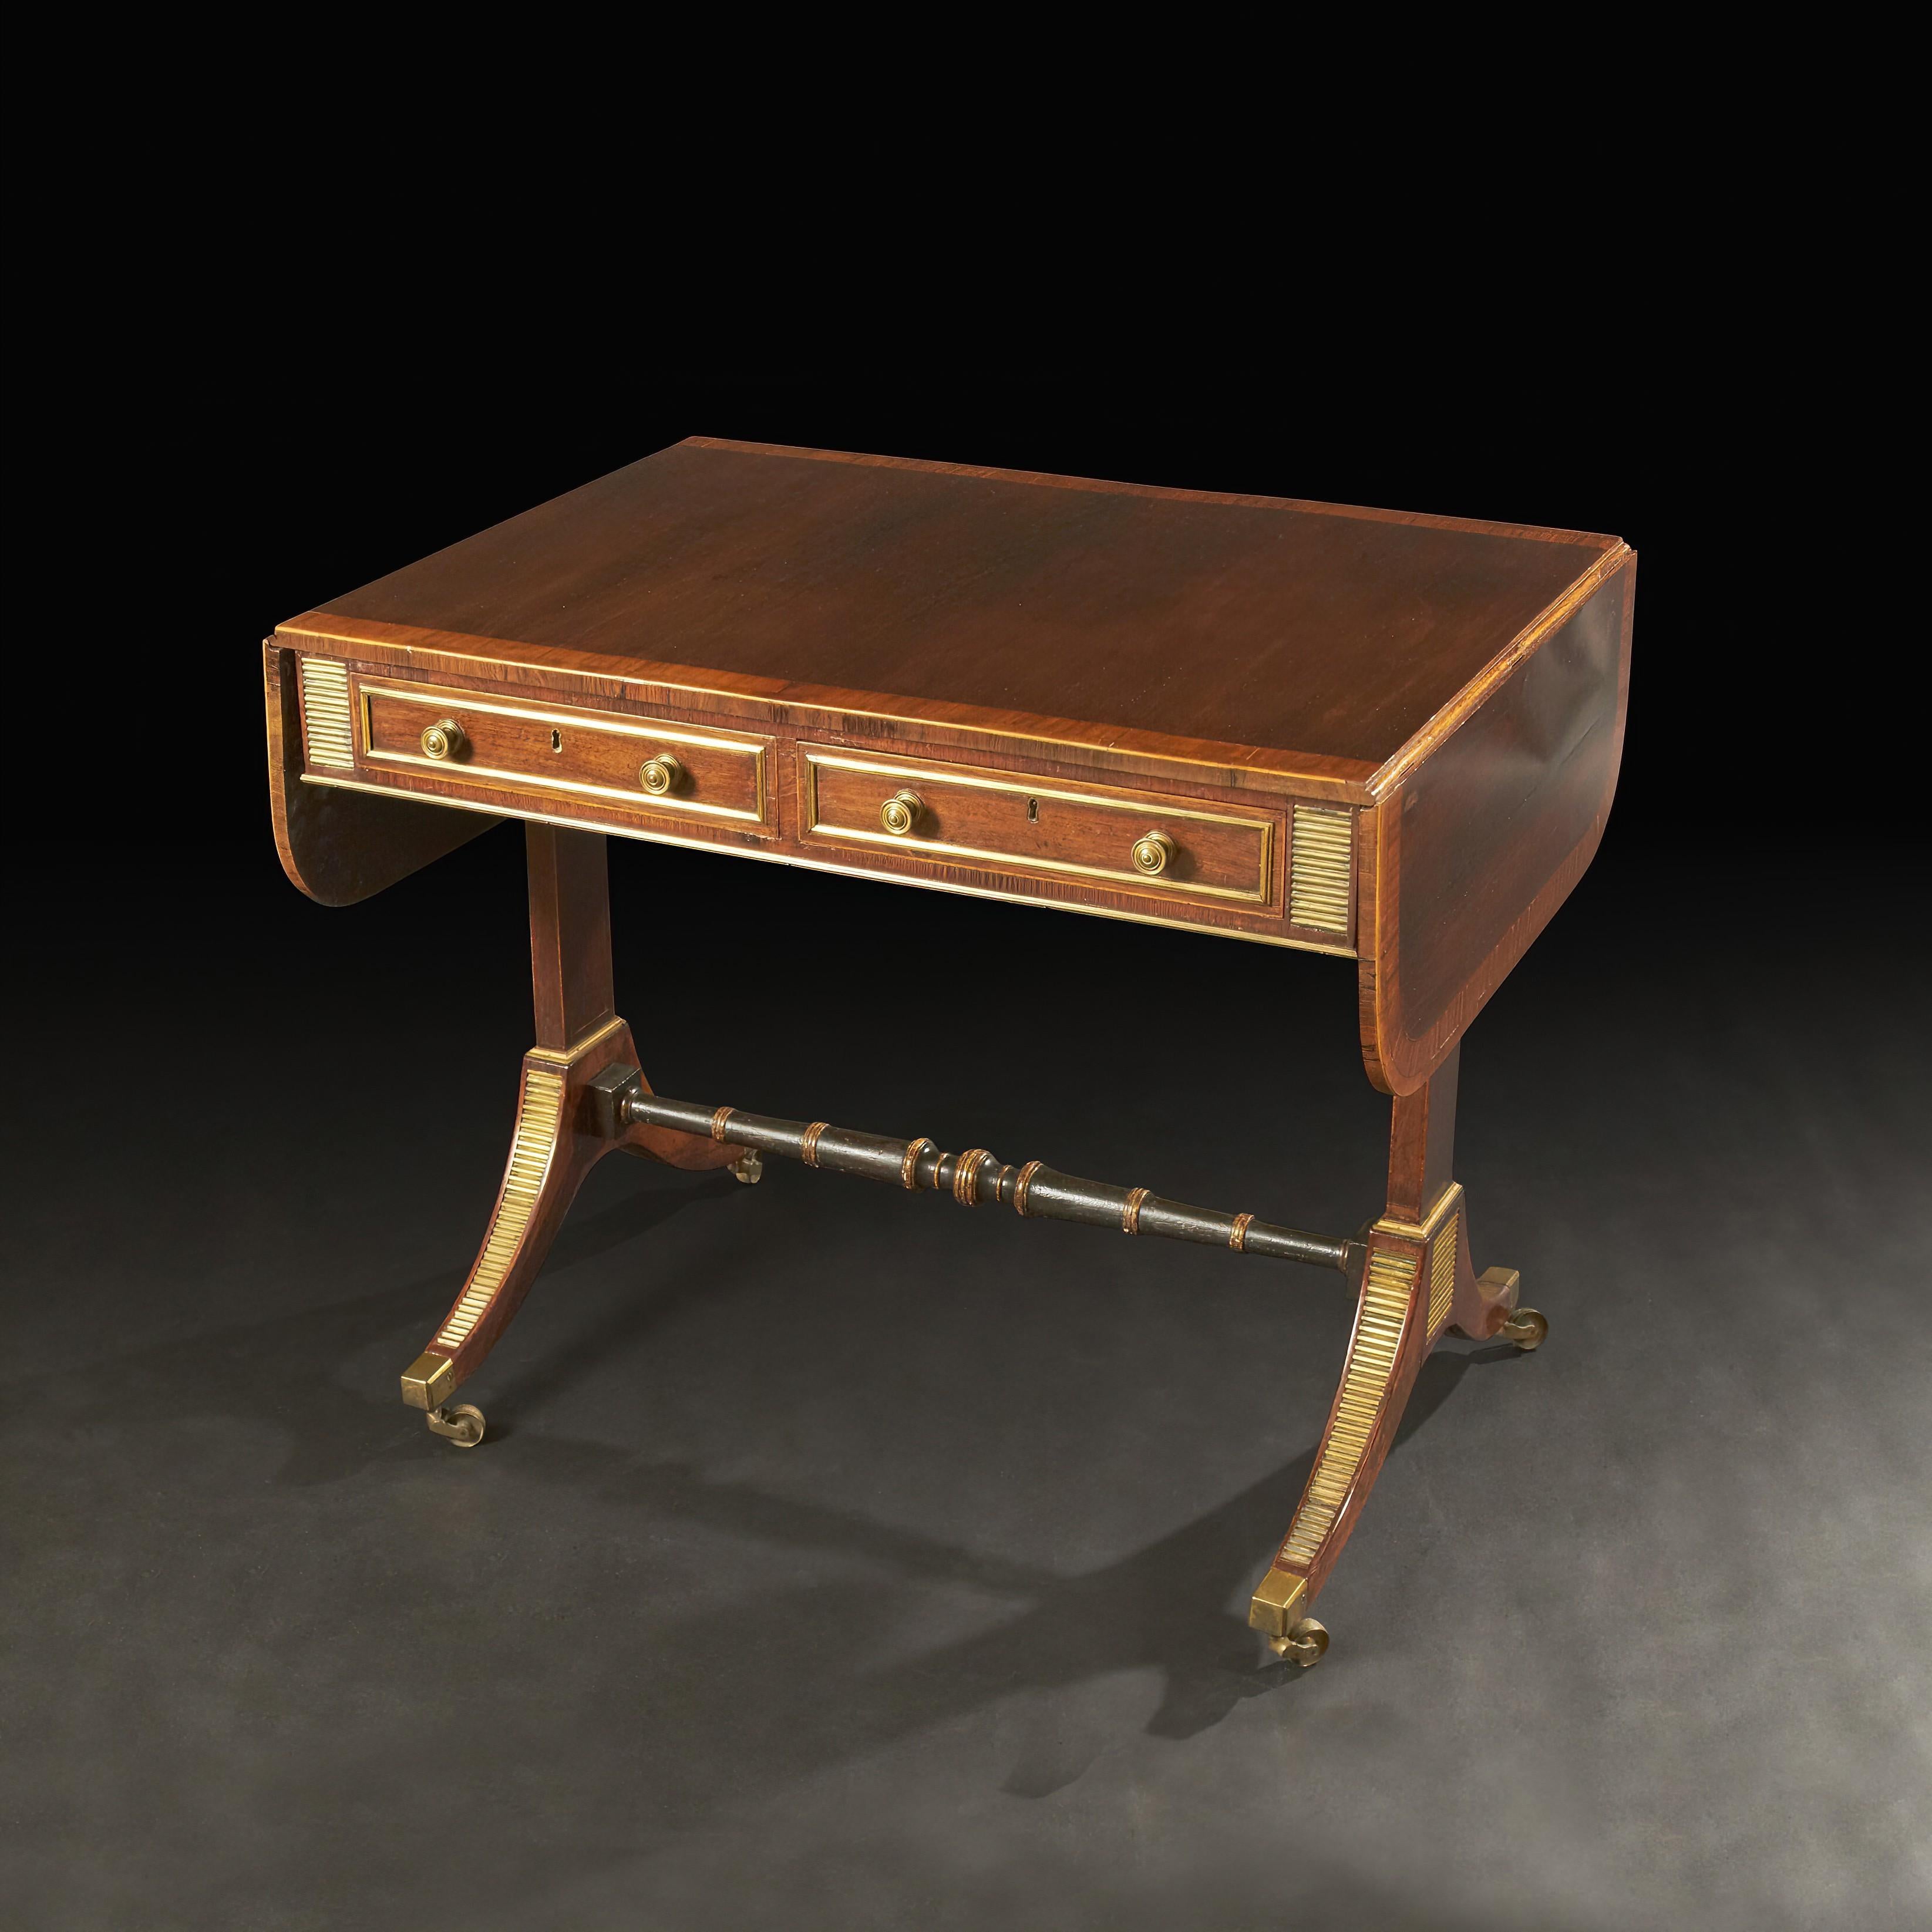 A fine English Regency rosewood and satinwood cross-banded sofa table, with D form drop leaf ends, two drawers with brass hardware and trim, with a turned ebonized and gilded stretcher base, with brass mounts and raised and brass casters. Attributed